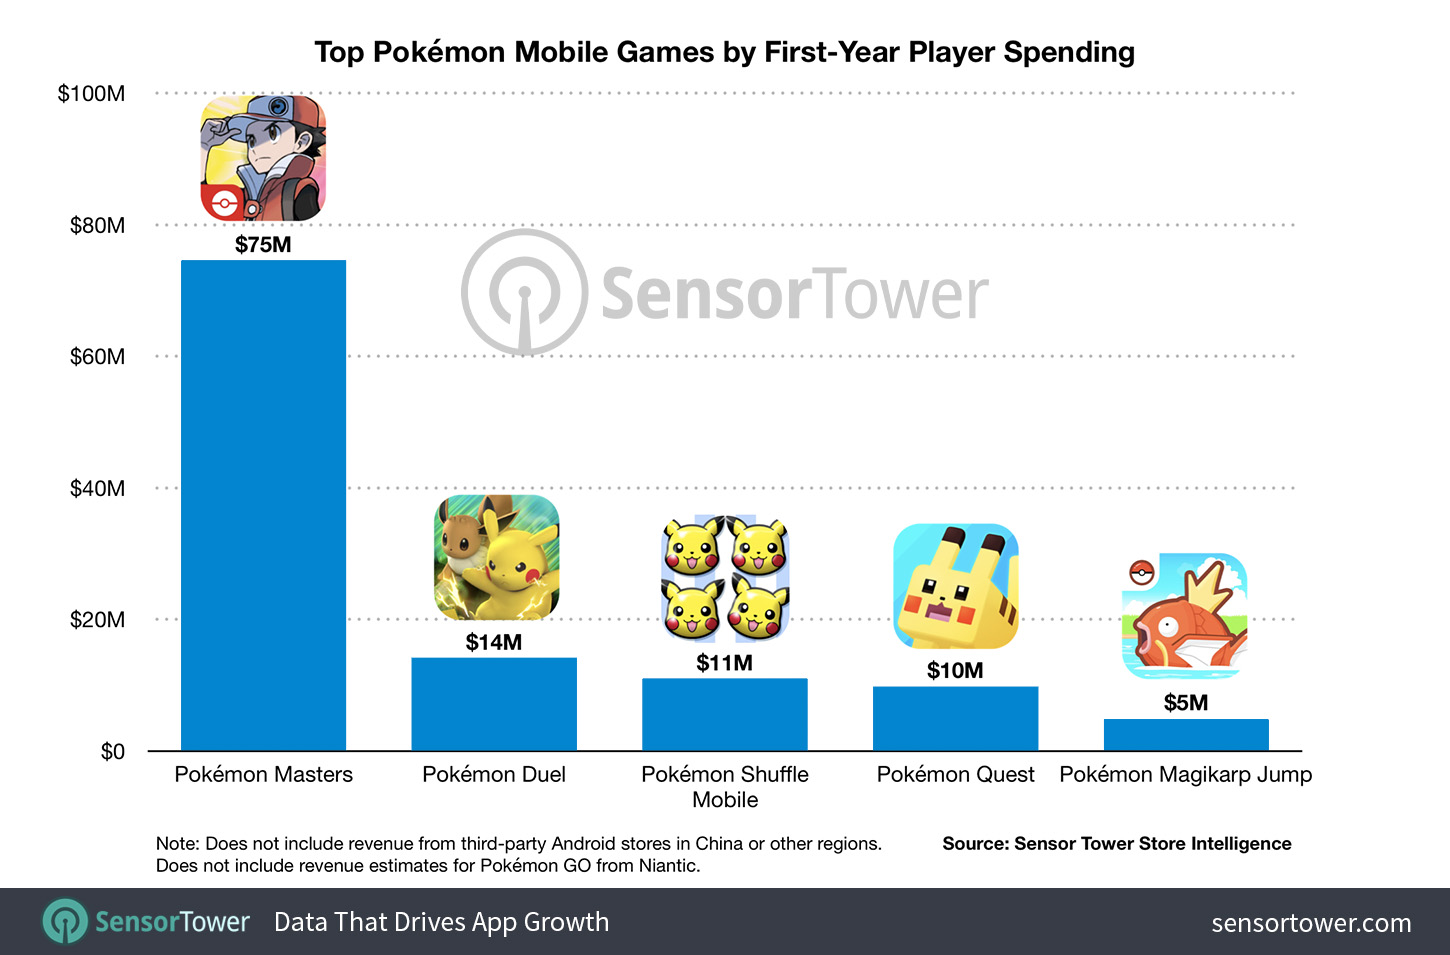 Top Pokémon Mobile Games by First-Year Player Spending